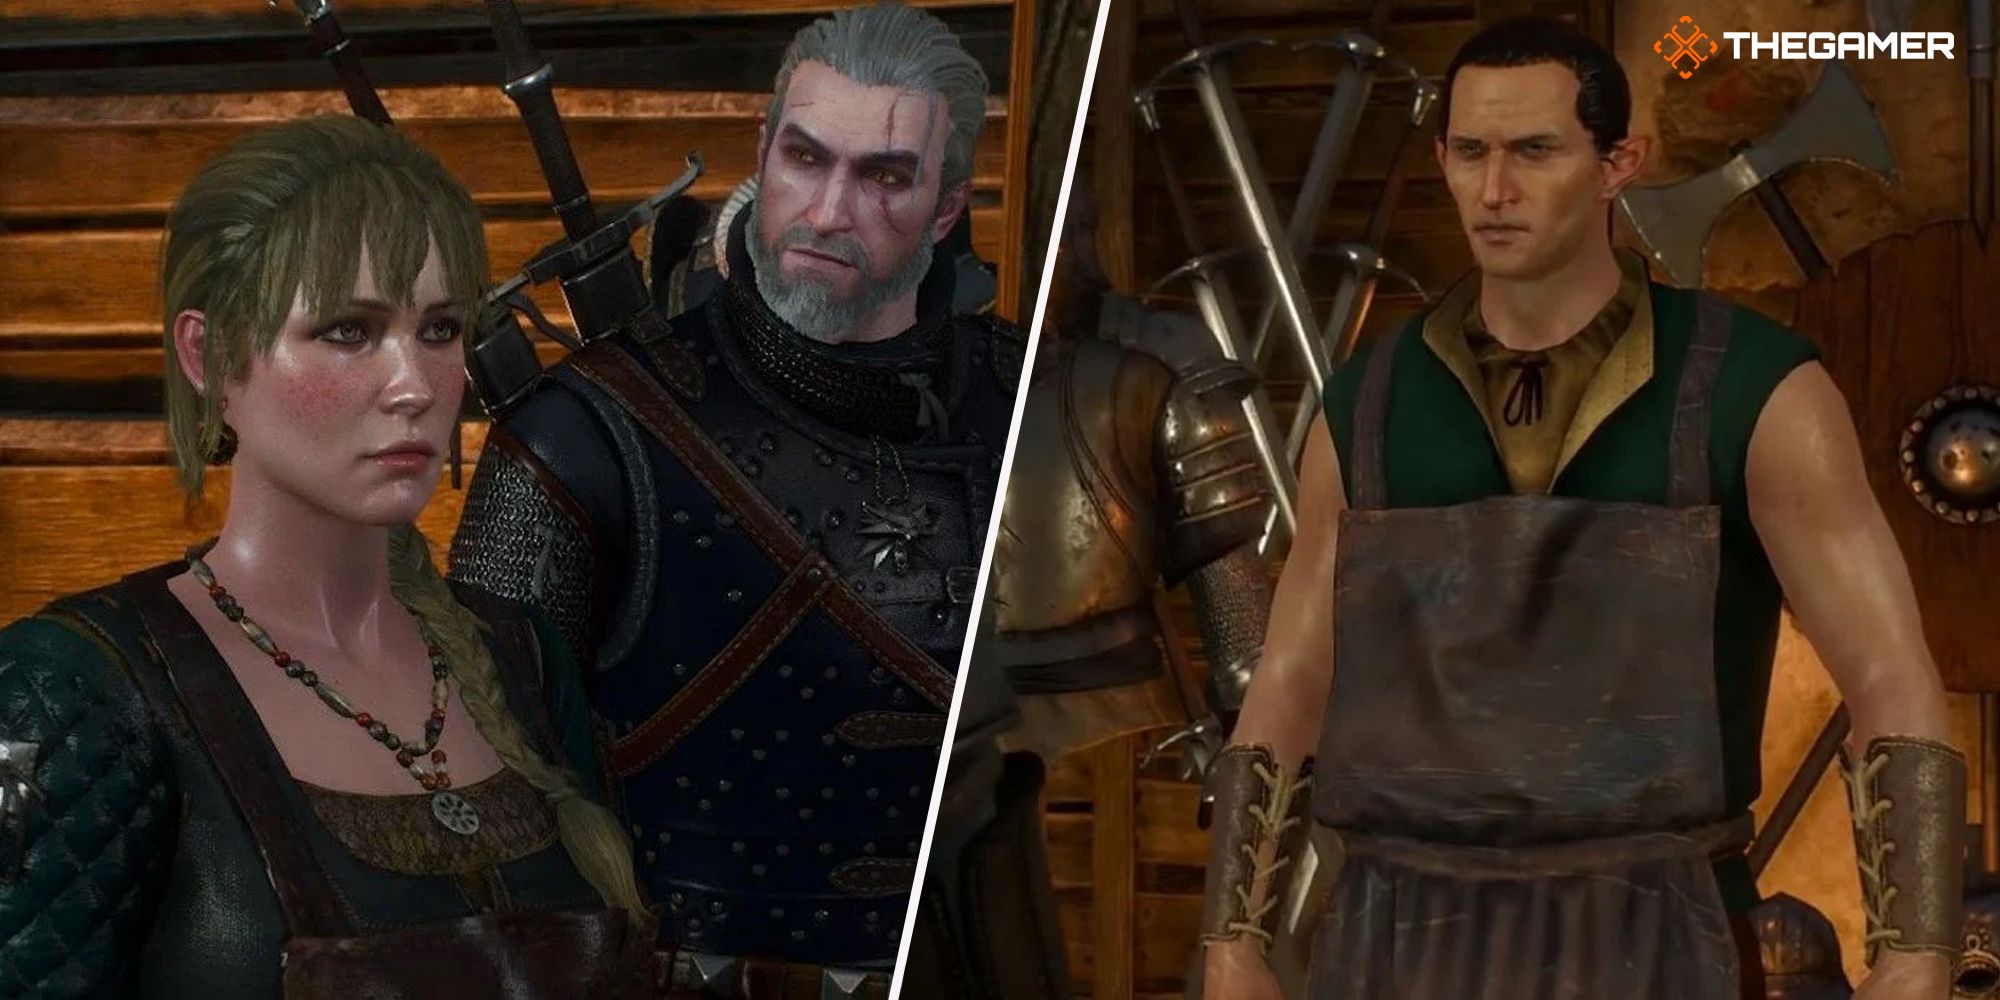 The Witcher 3 collage of Geralt and other characters